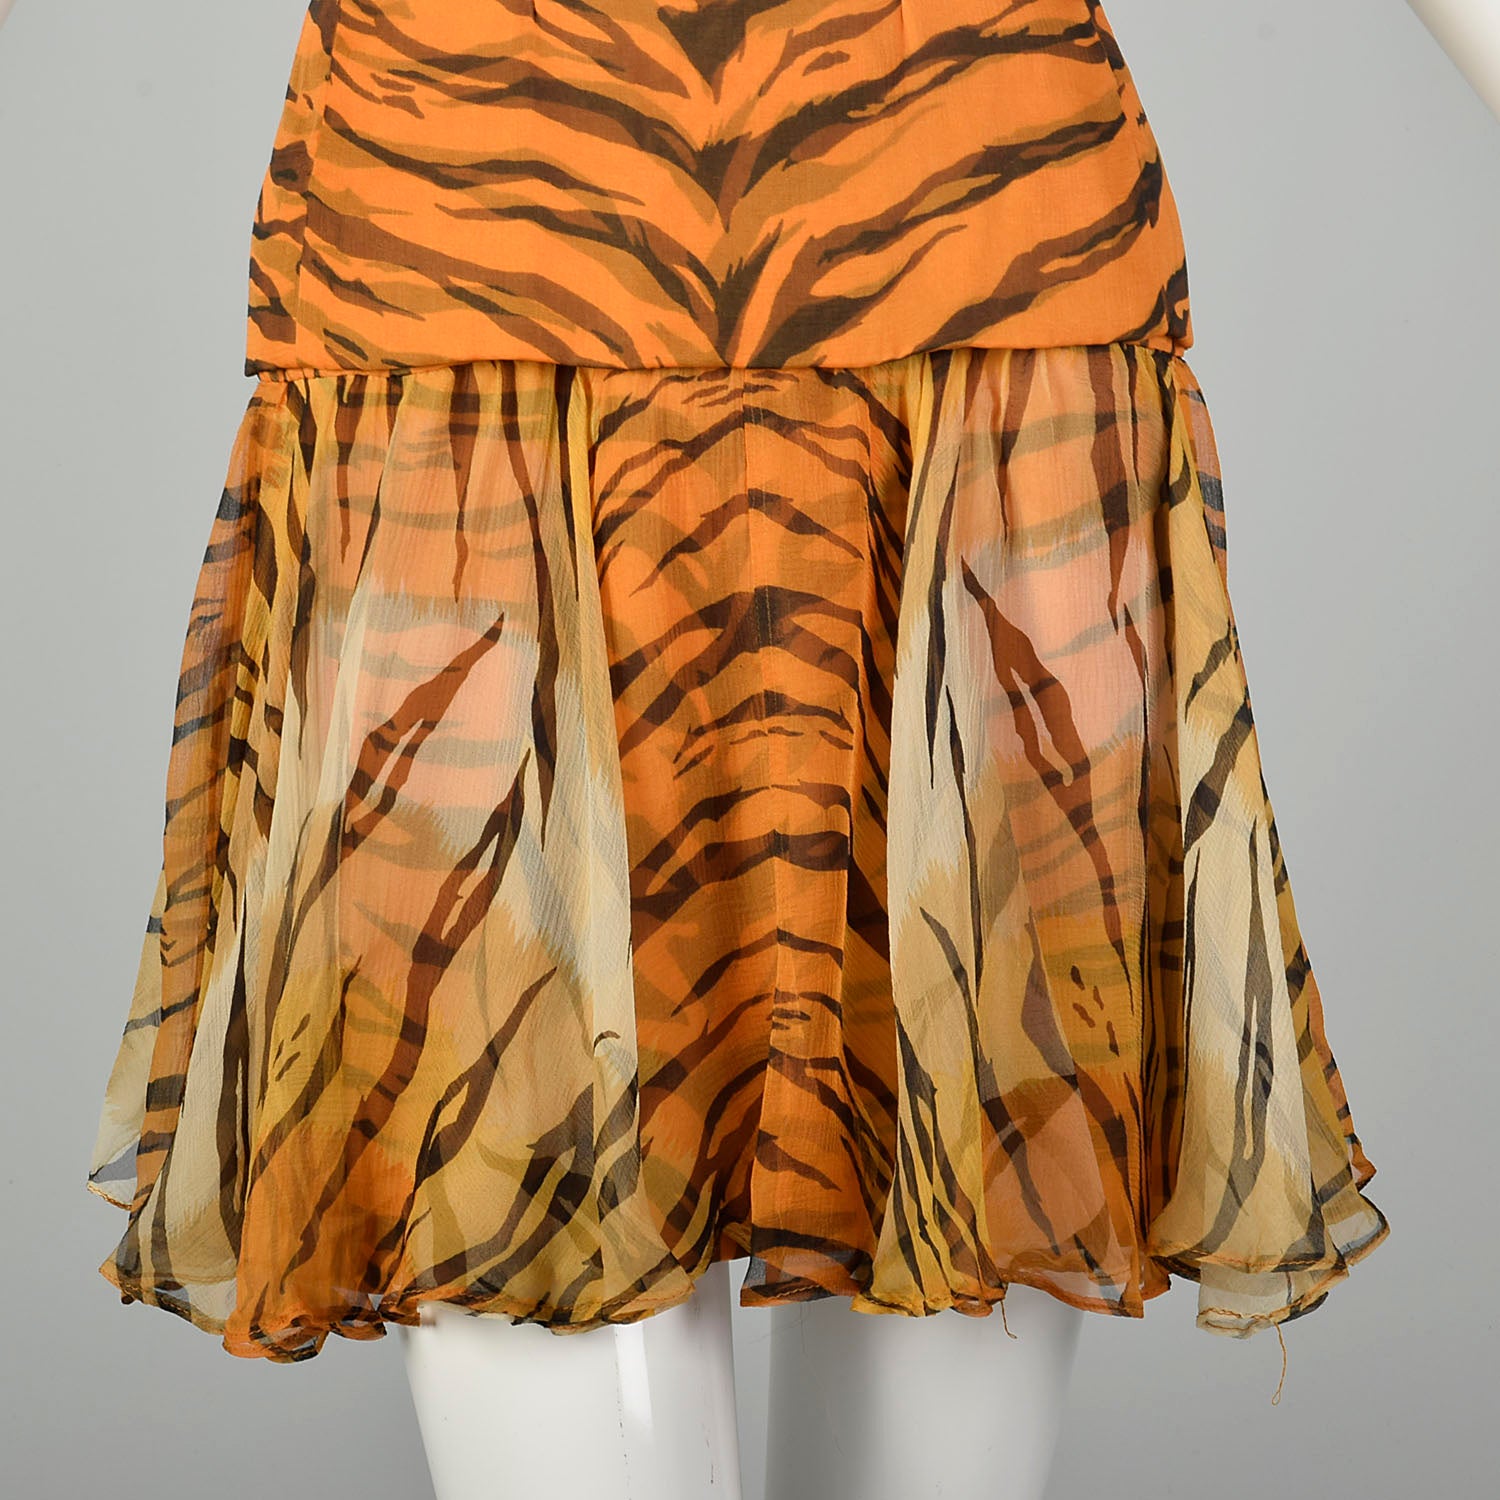 Small 1960s Tiger Stripe Outfit Silk Animal Print Two Piece Dress